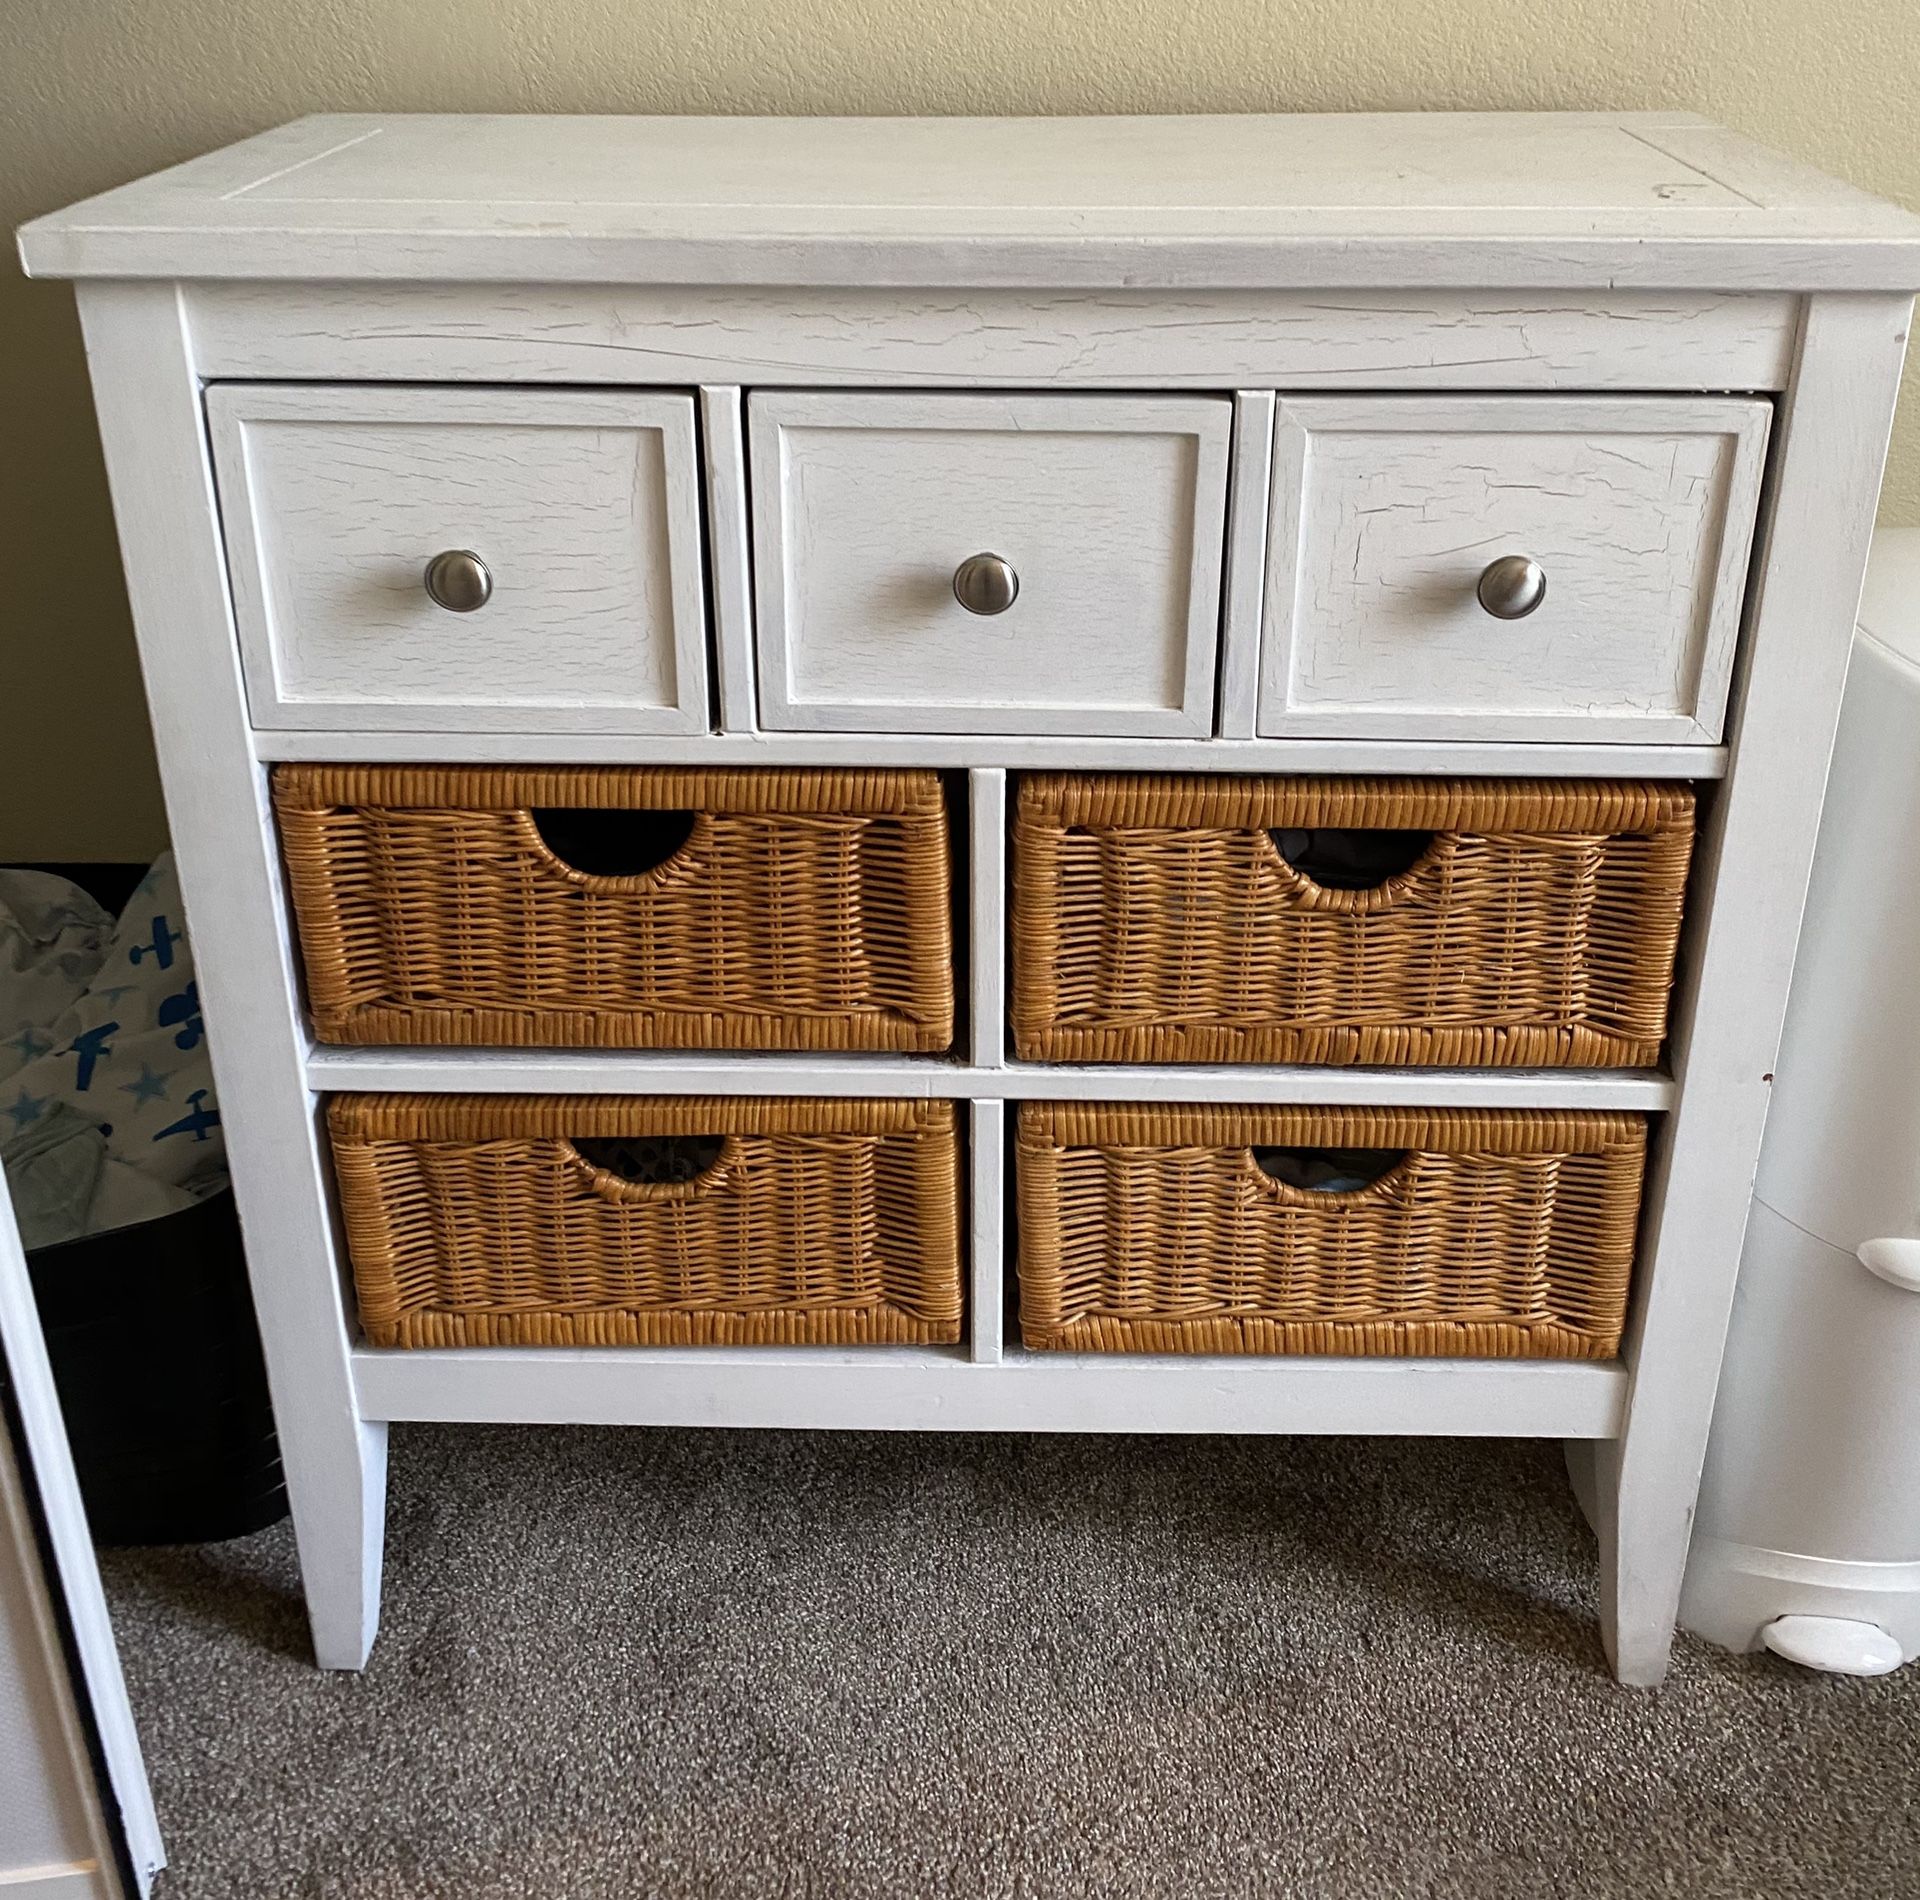 Dresser/Diaper Changing Table